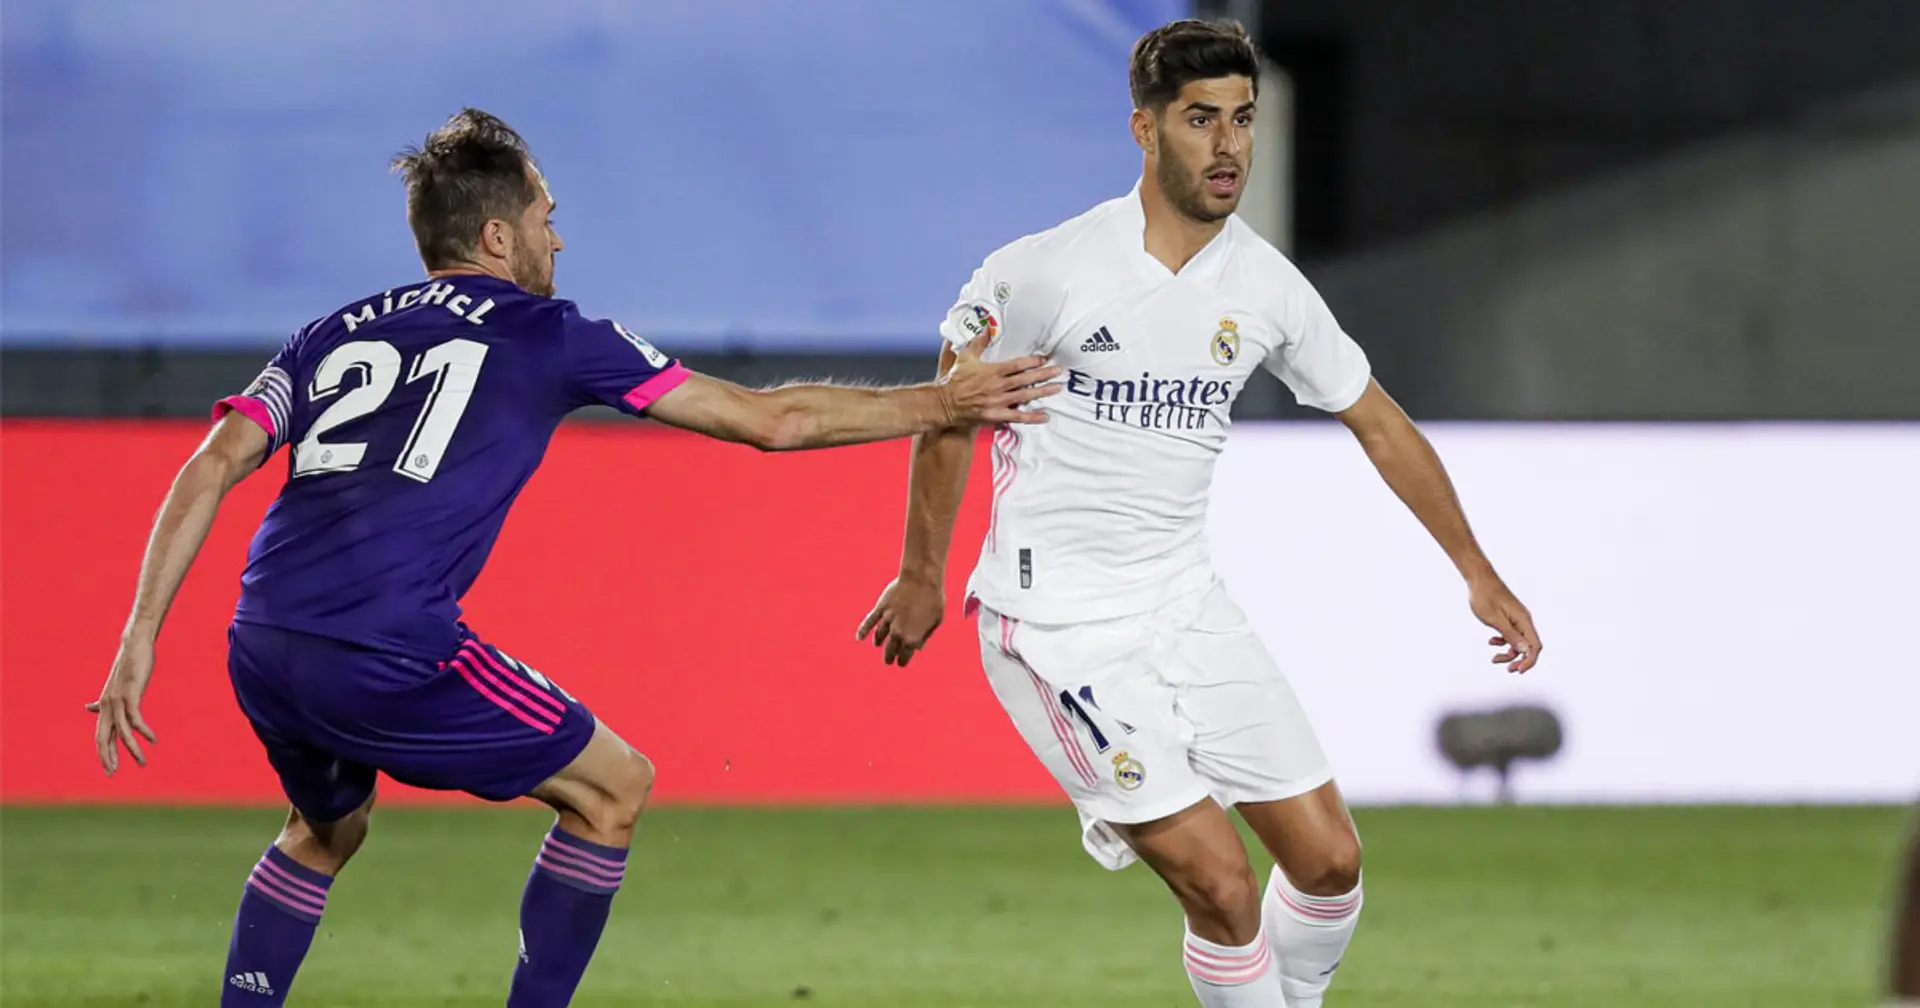 Levante vs Real Madrid: team news, probable line-ups, score predictions and more – preview